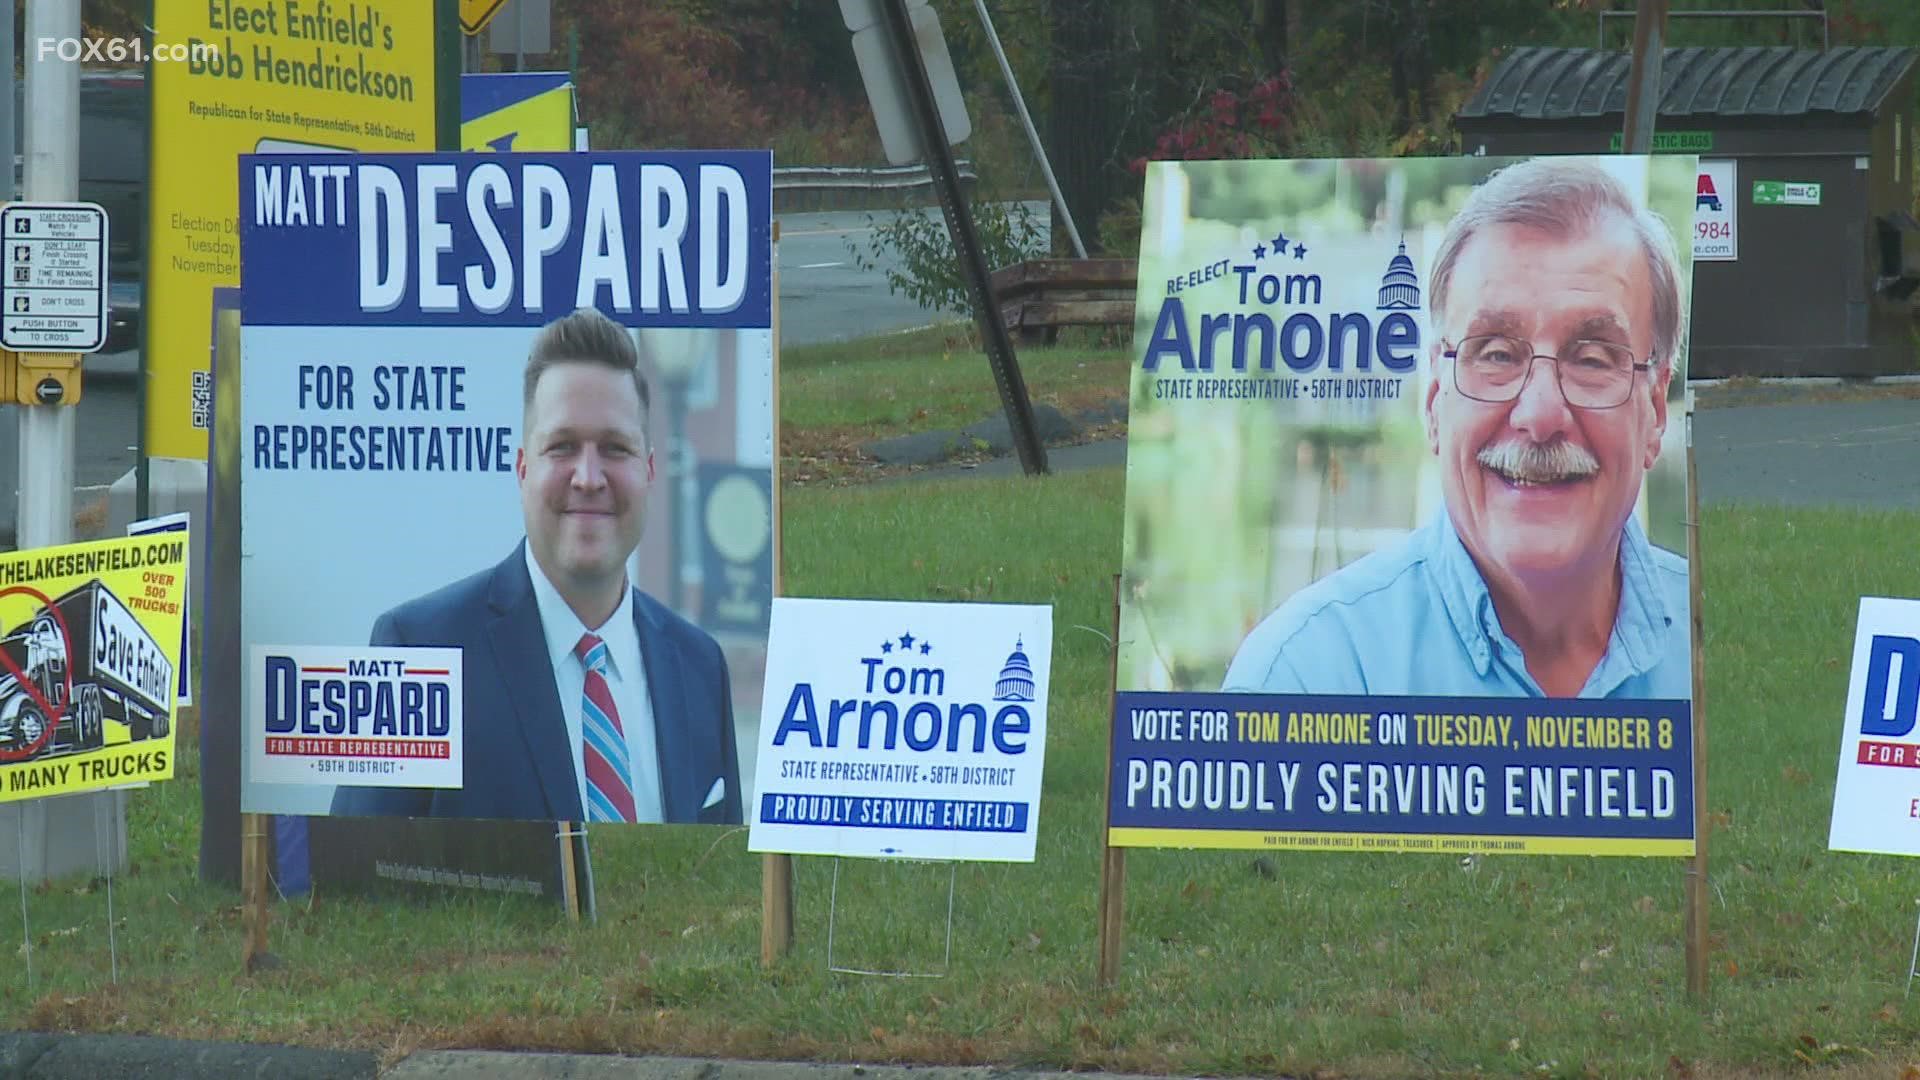 The November 8th Election is just two weeks away and the yard signs showing support for political candidates or proposals are spread out across the state.